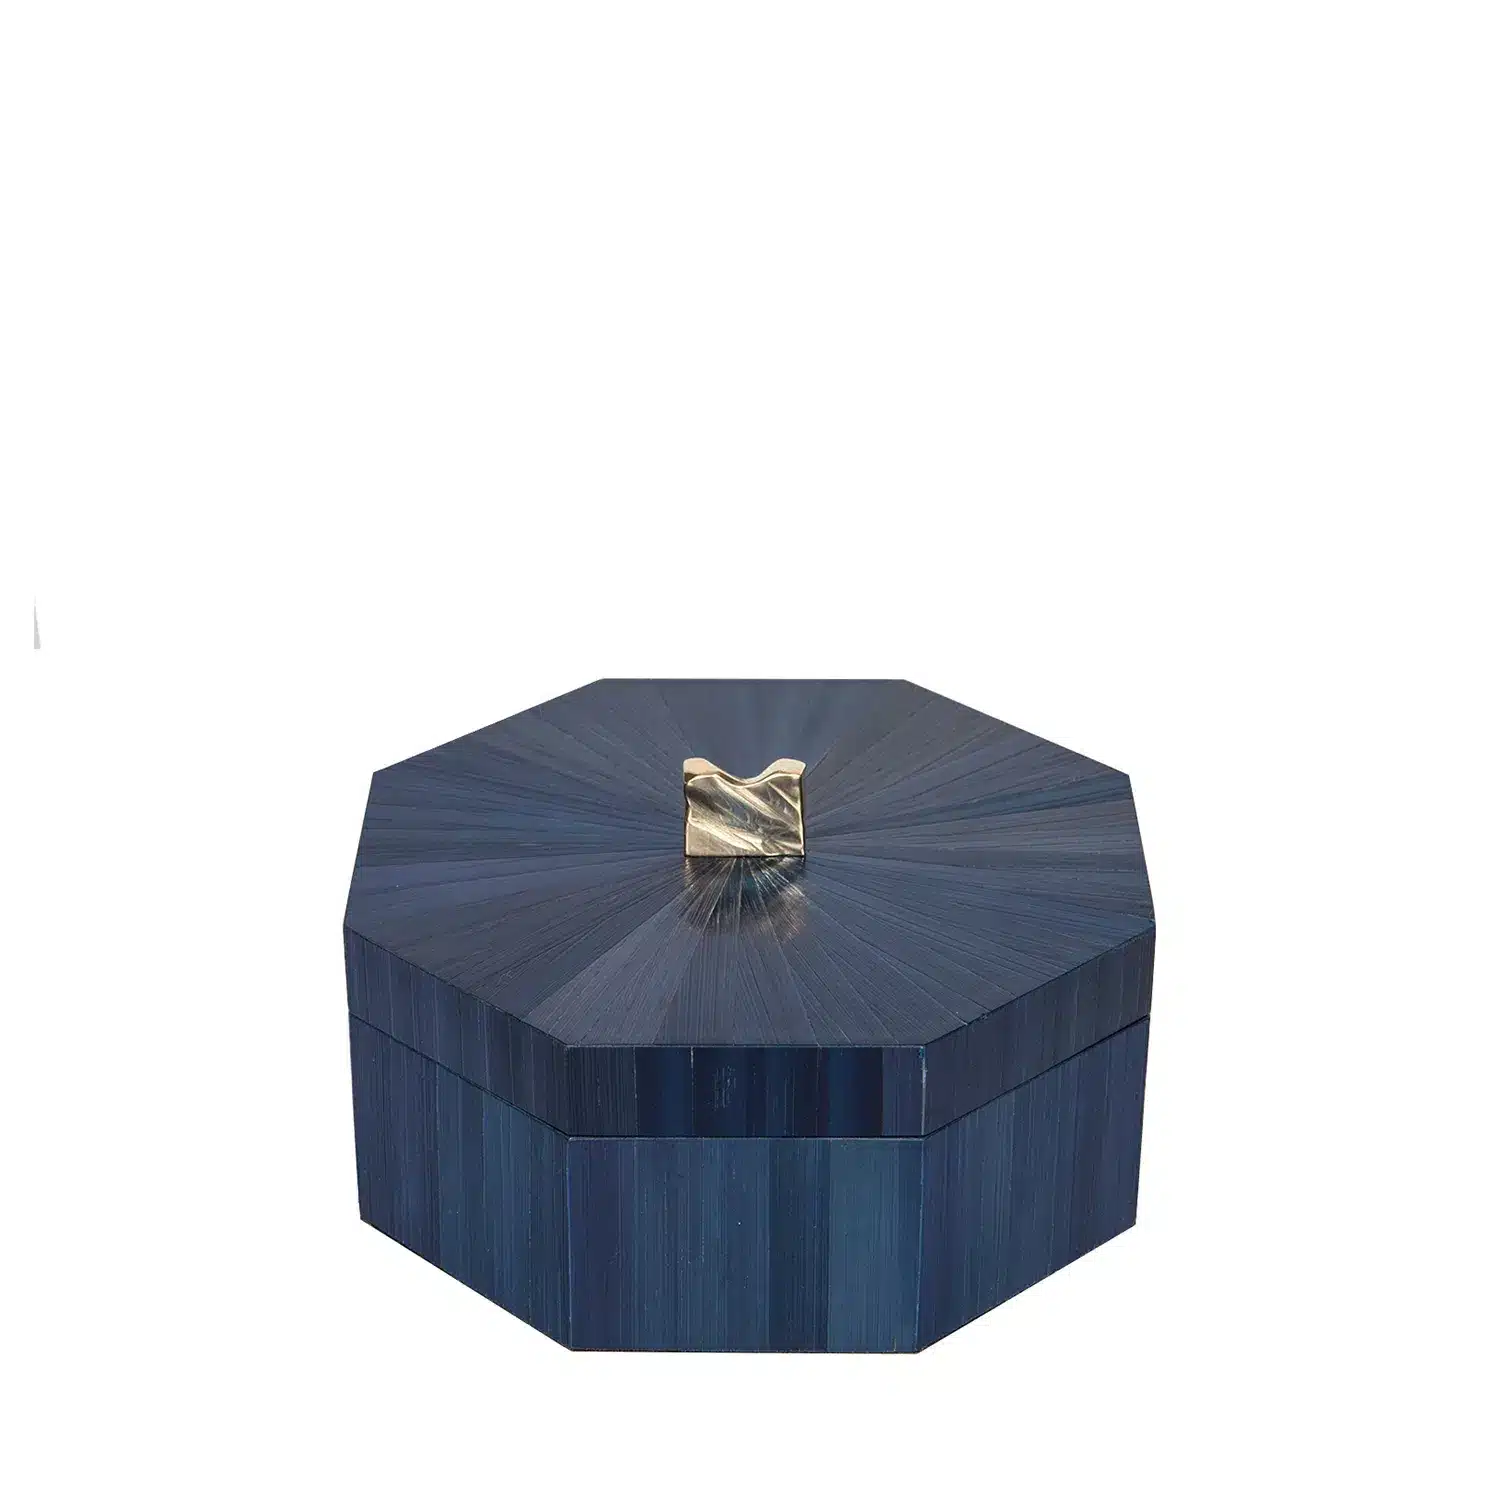 A delightful shade of blue on this ultramarine straw marquetry box